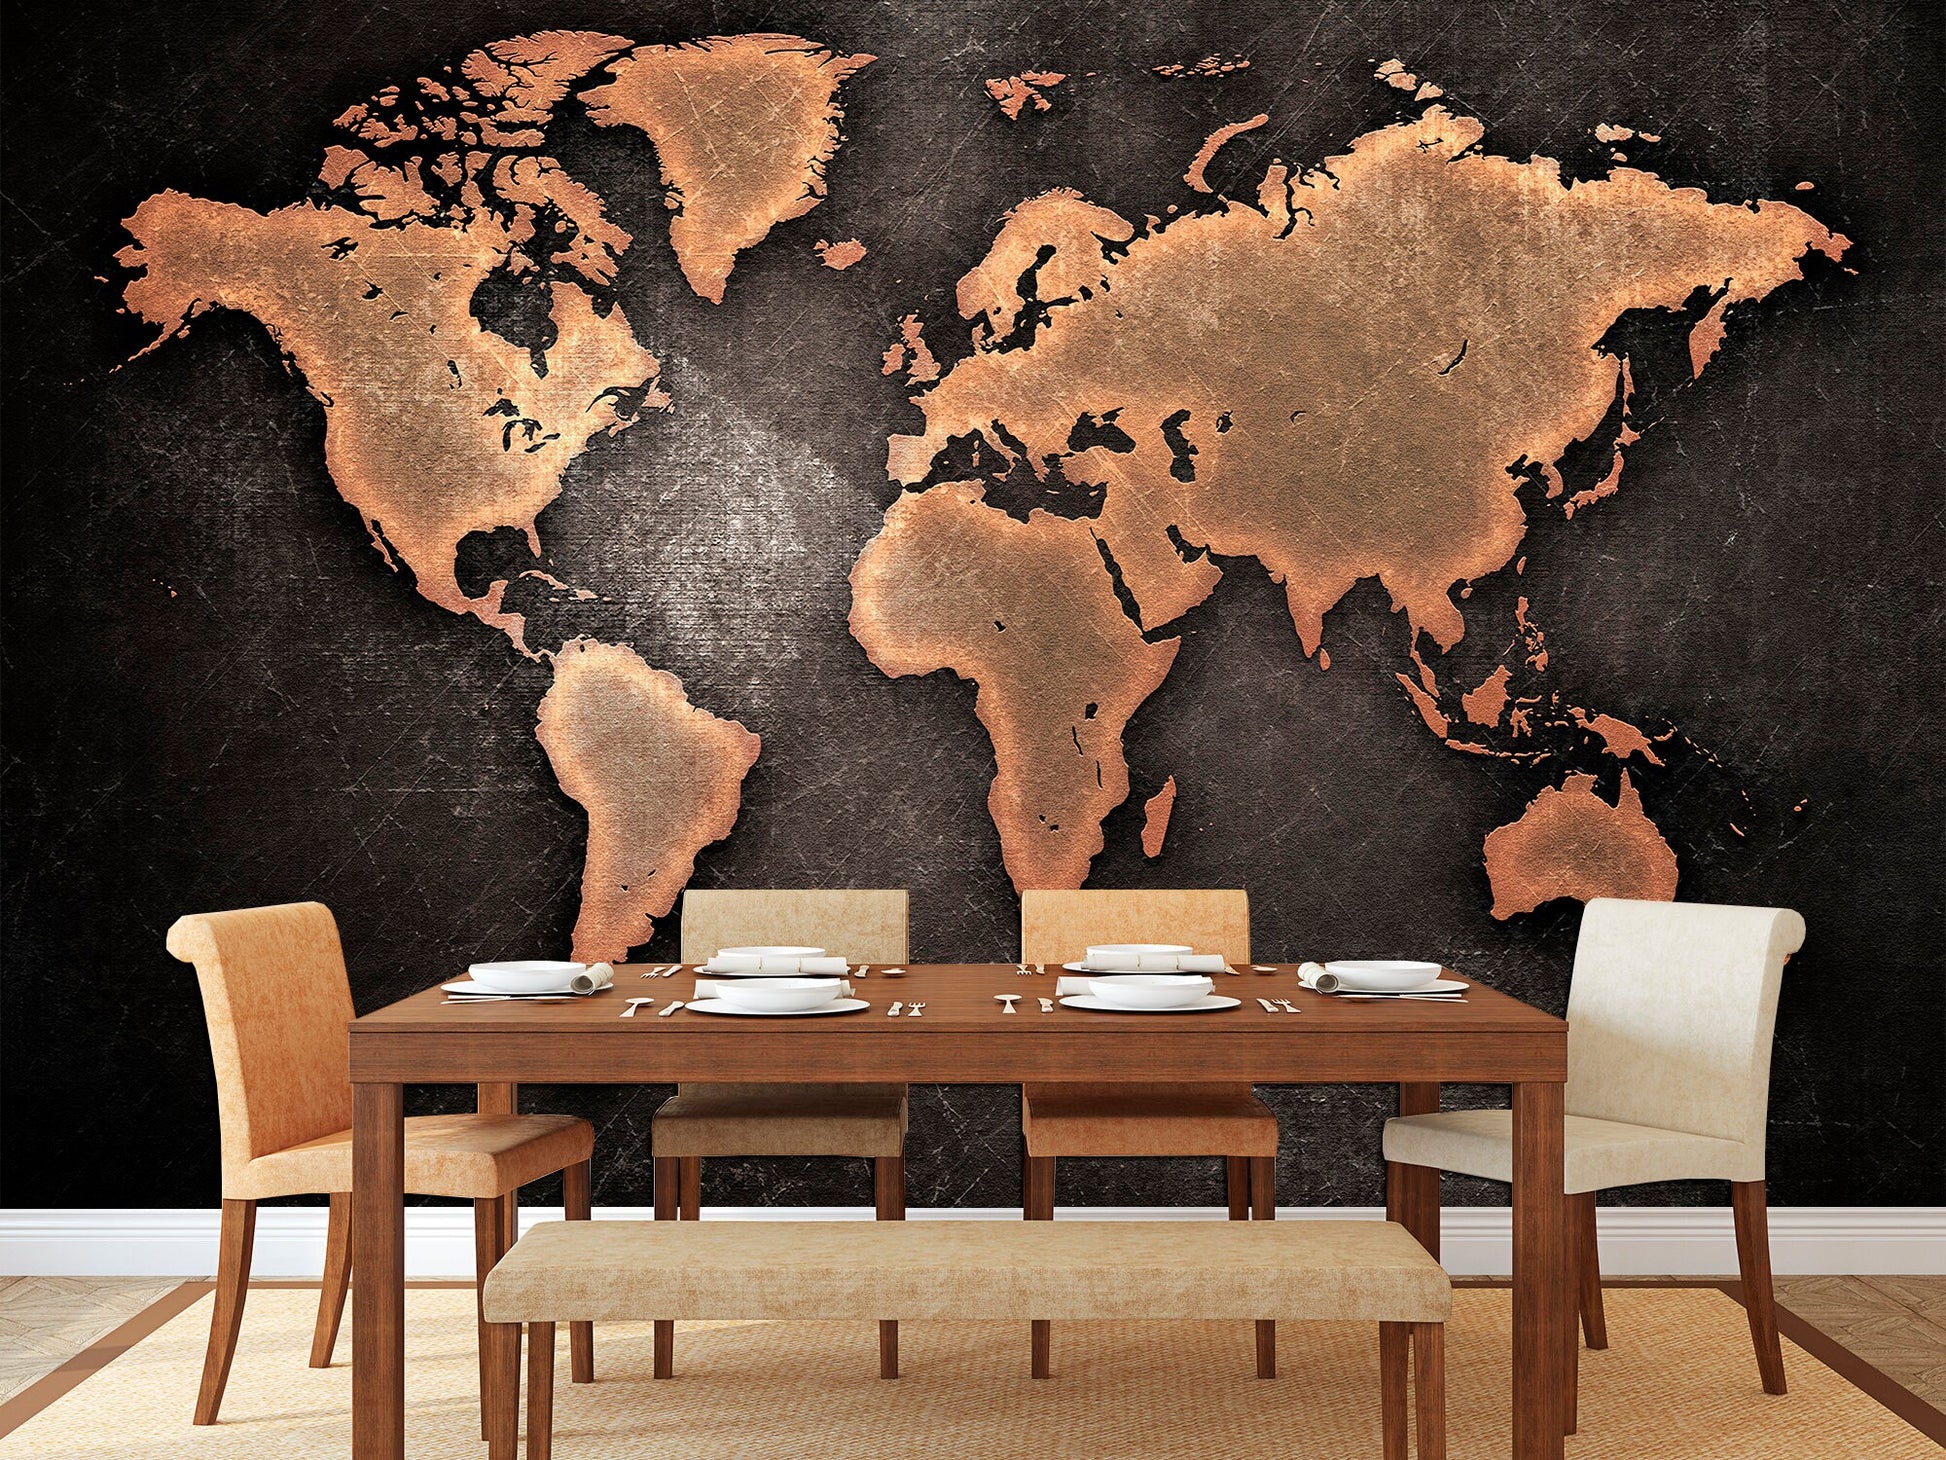 World map print Removable wallpaper Large world map, World map decor Peel stick wallpaper World map wall mural